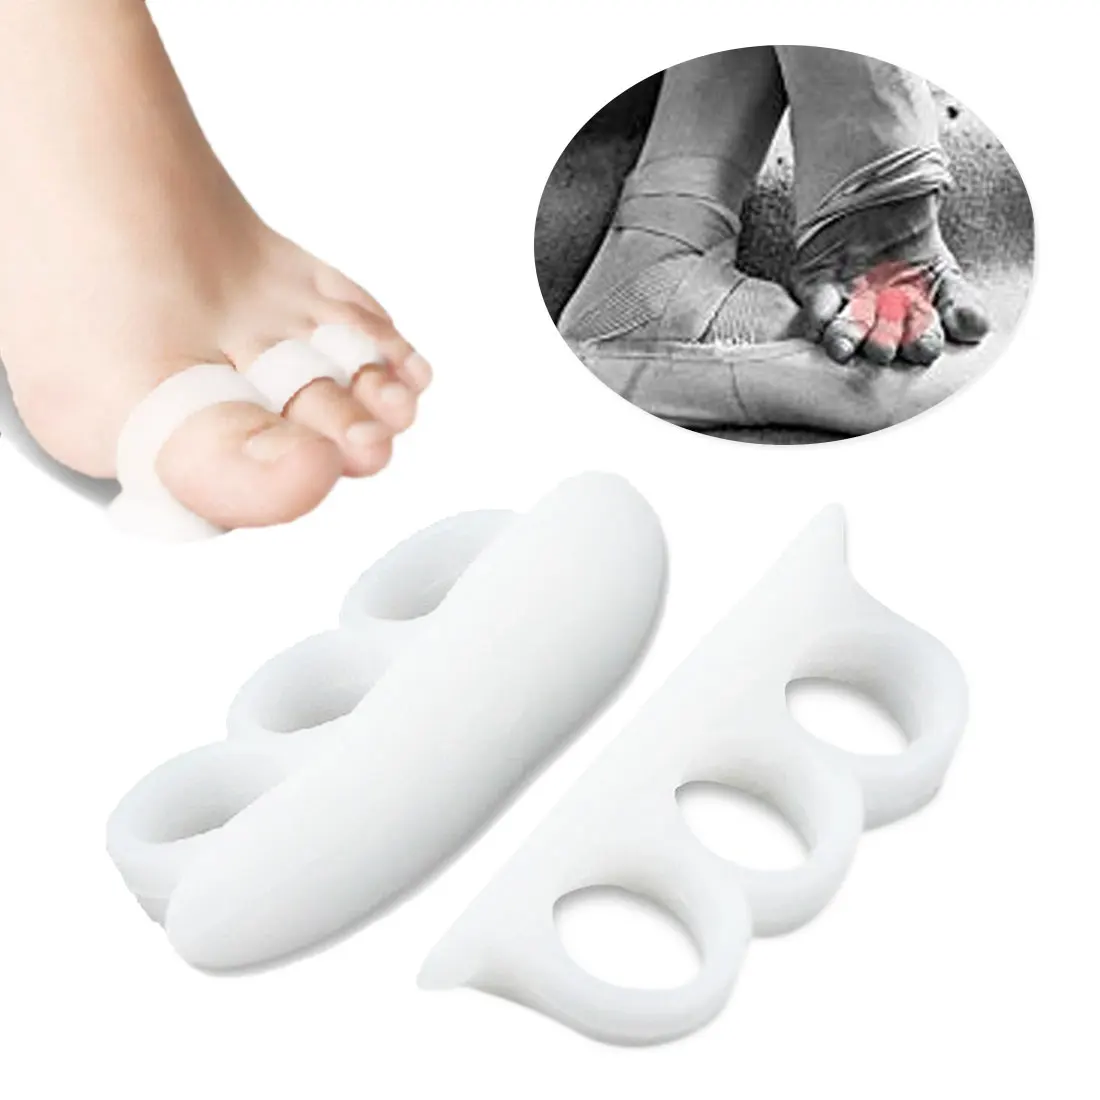 

New Hammer Orthopedic Cushion Feet Care Shoes Insoles 2pcs/1pair Gel Toe Separators Stretchers Alignment Overlapping Toes